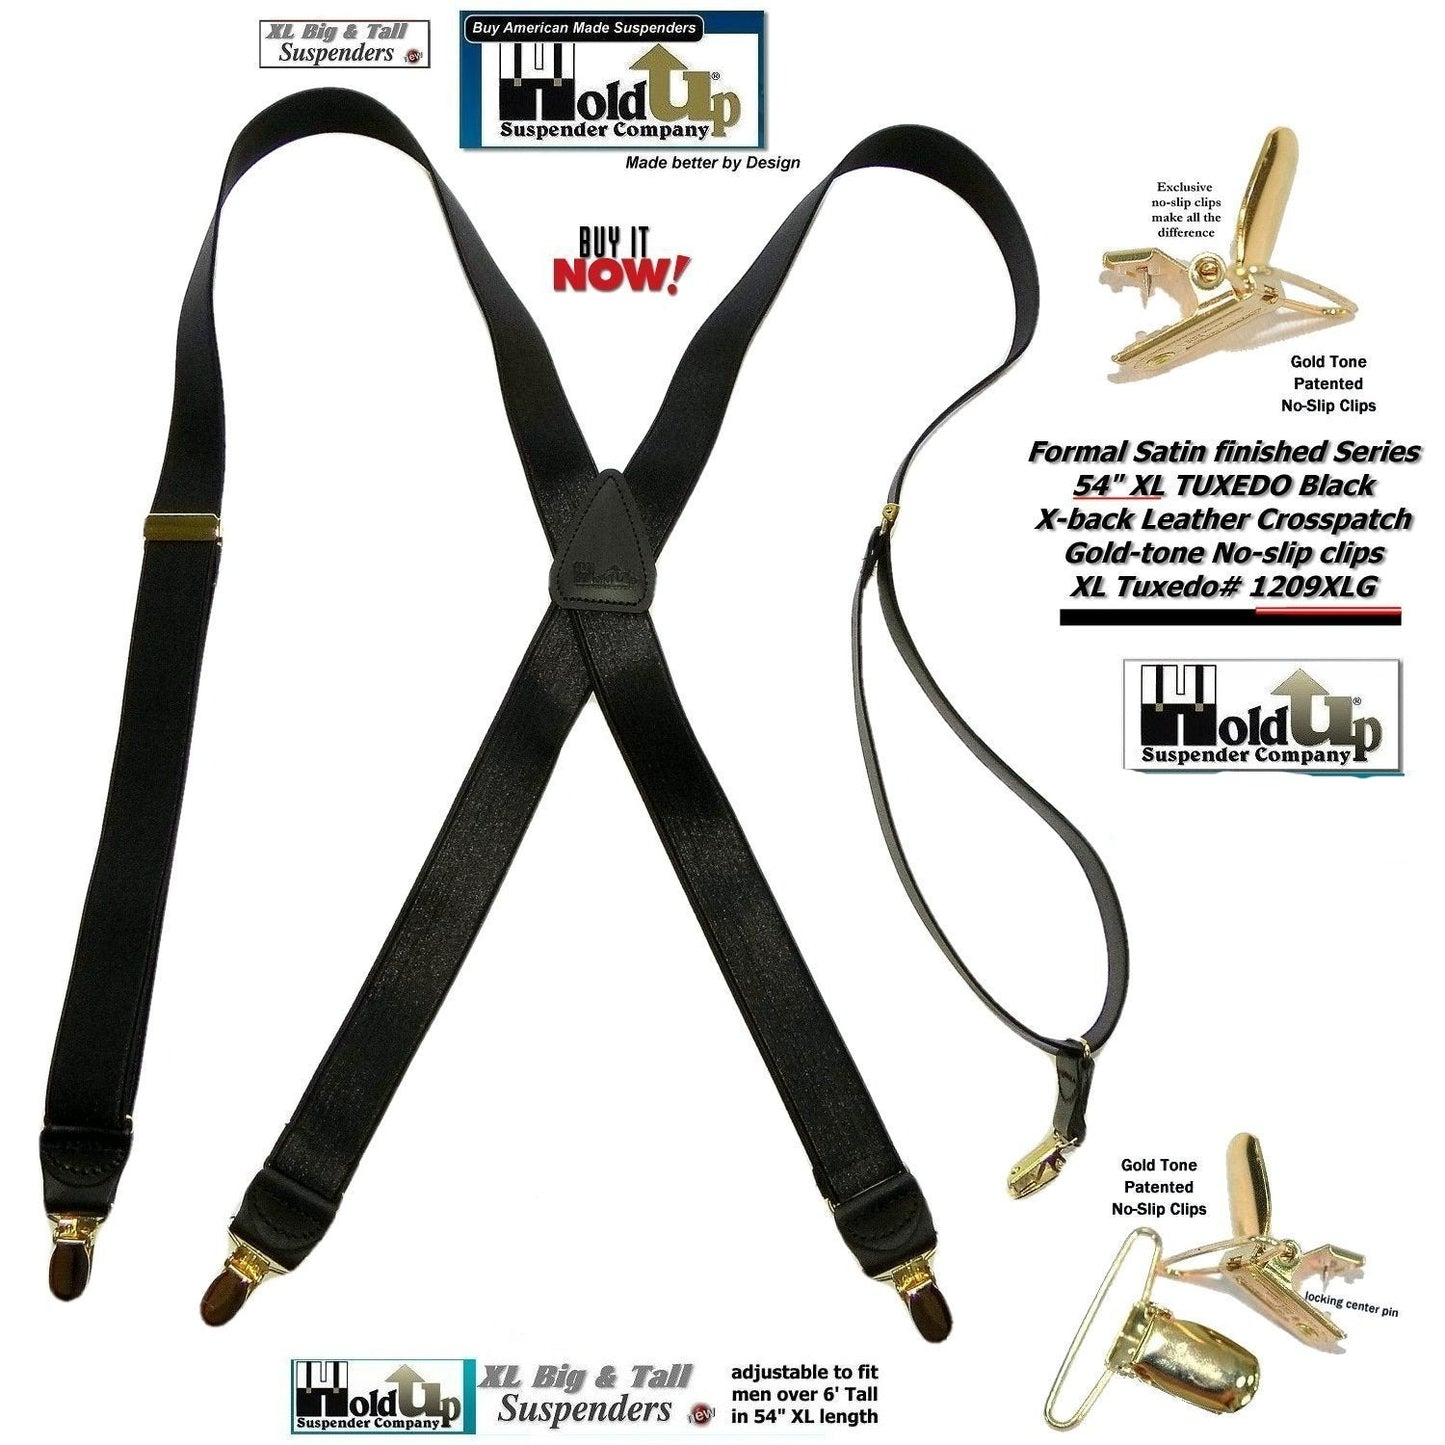 Hold-Ups XL Tuxedo Black Satin Finish 1" Wide, X-back style Suspenders with USA Patented No-slip Gold Clips